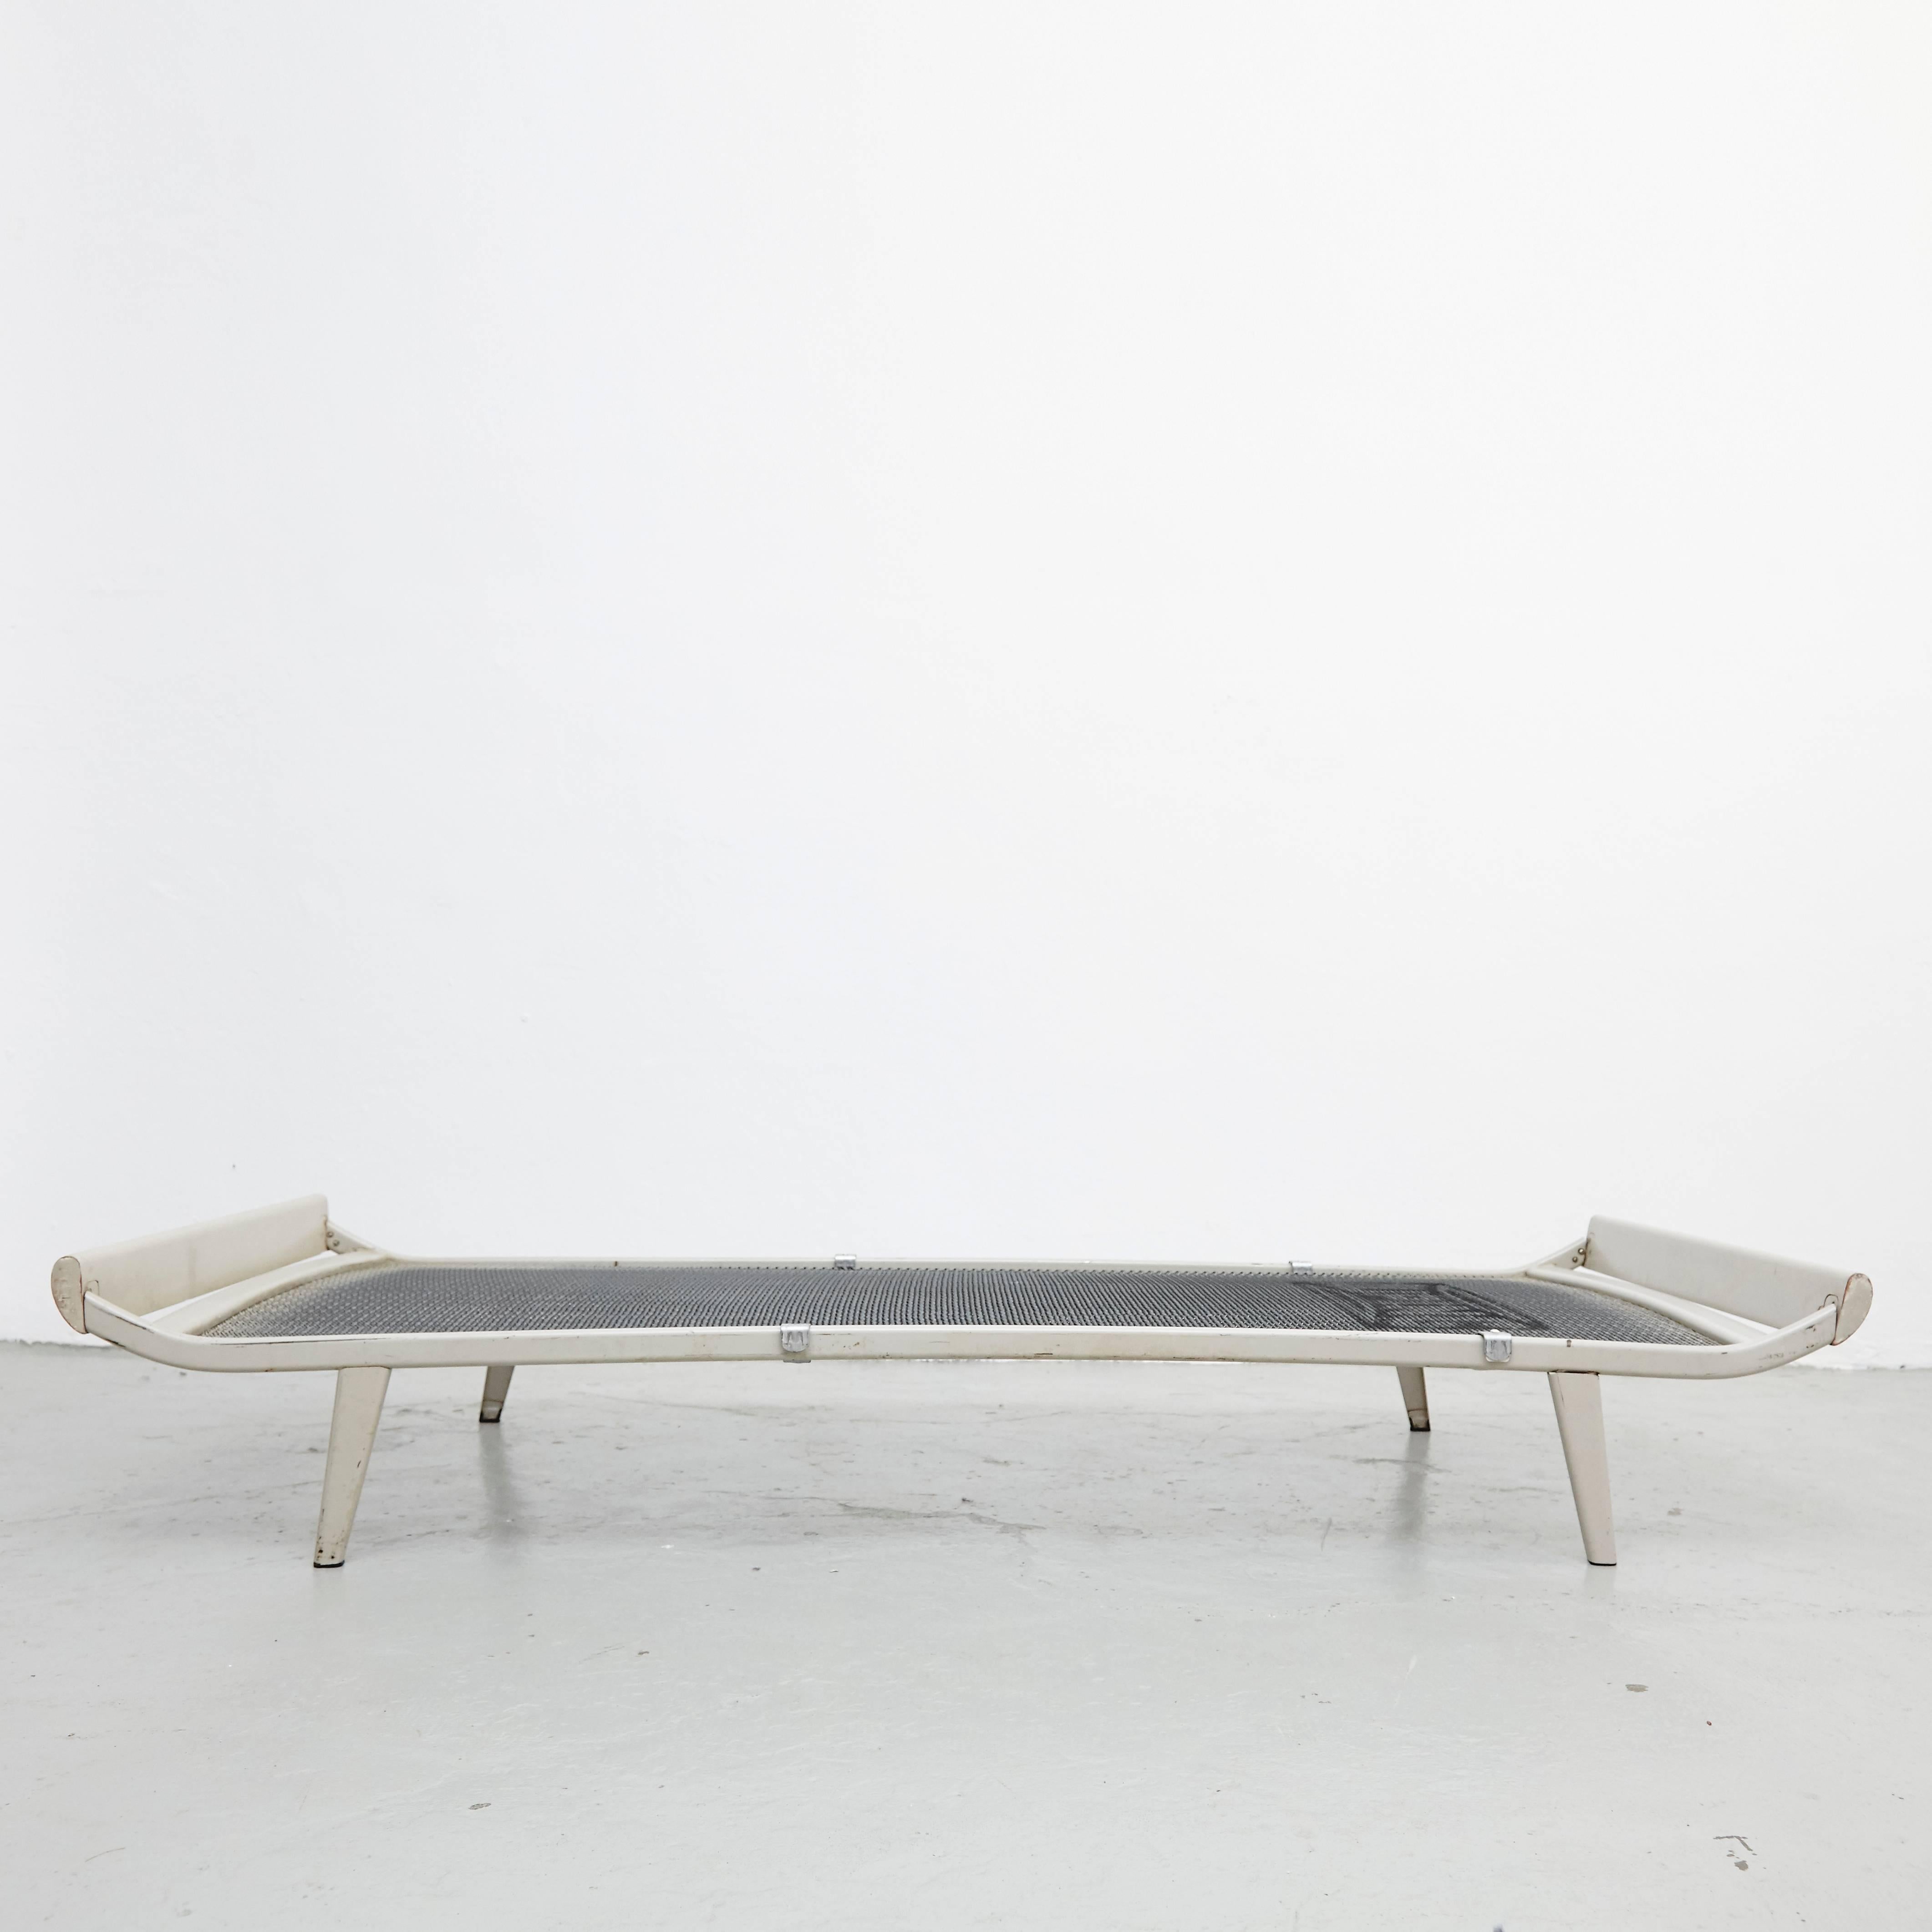 Daybed Cleopatra designed by Dick Cordemeijer manufactured in Netherlands, circa 1950.

In good original condition, with minor wear consistent with age and use, preserving a beautiful patina.

 